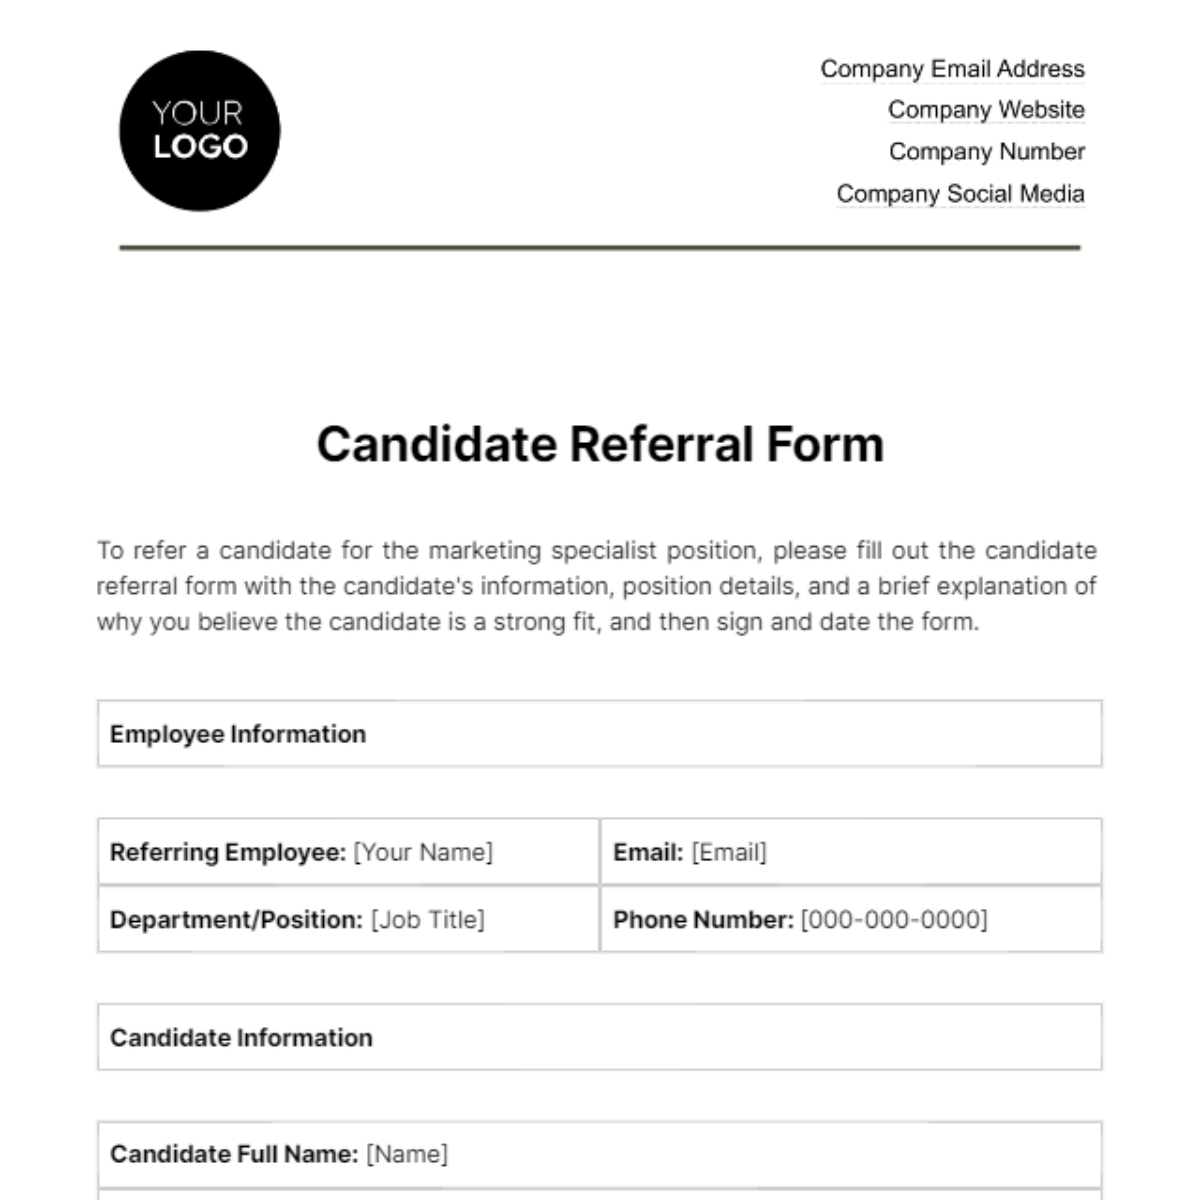 Candidate Referral Form HR Template